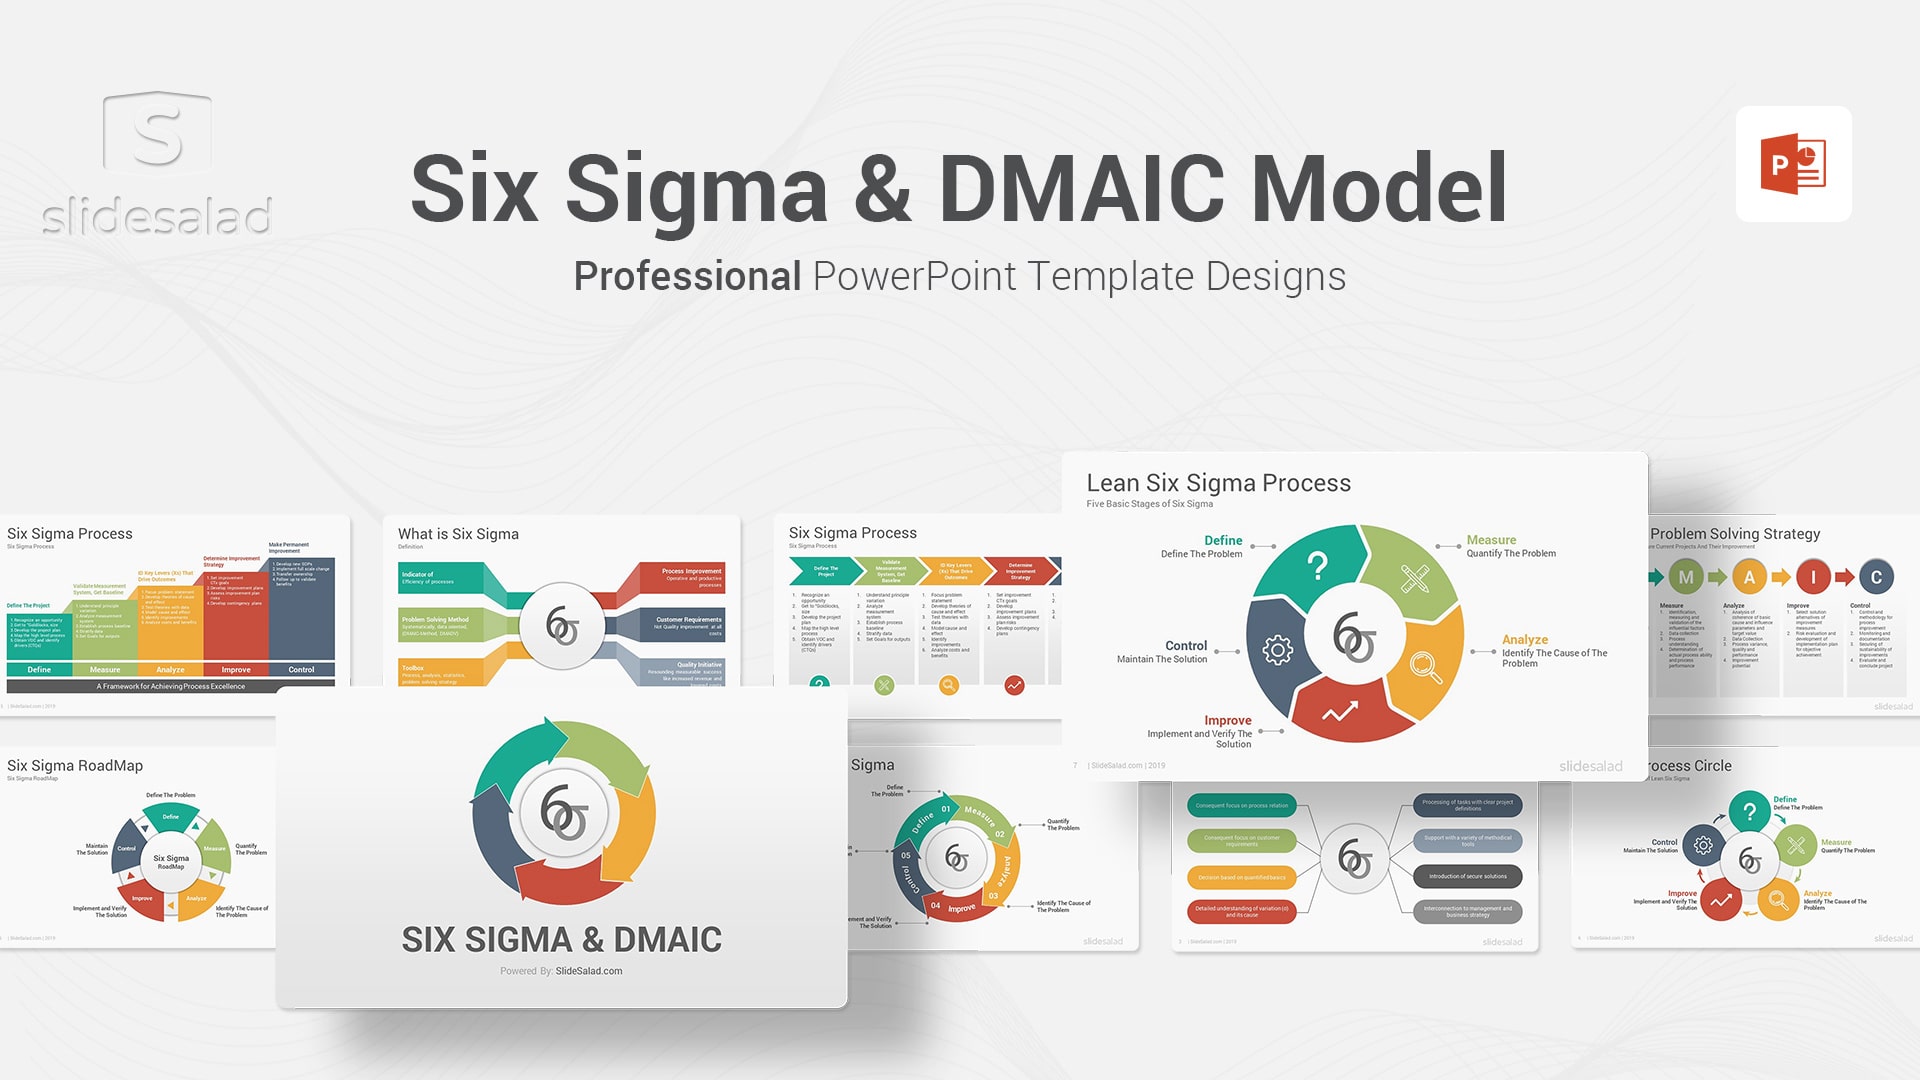 Six Sigma and DMAIC Model PowerPoint Templates Diagrams - Rapidly Improve Your Business Performance with Six Sigma and DMAIC Model